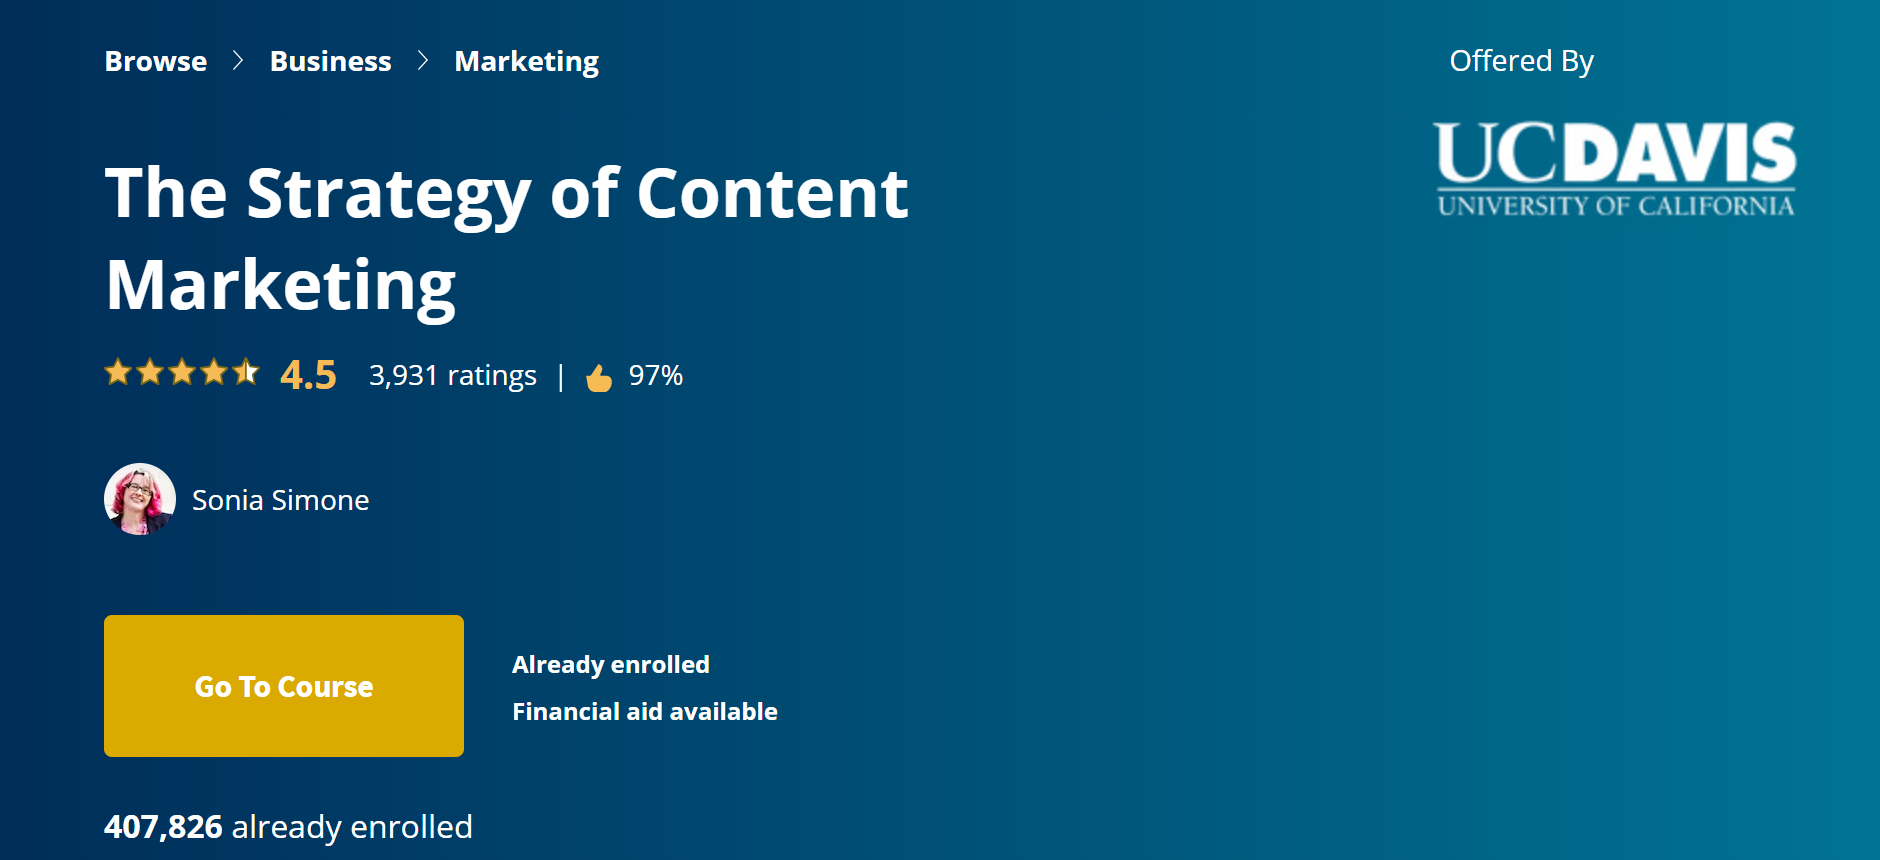 The Strategy of Content Marketing